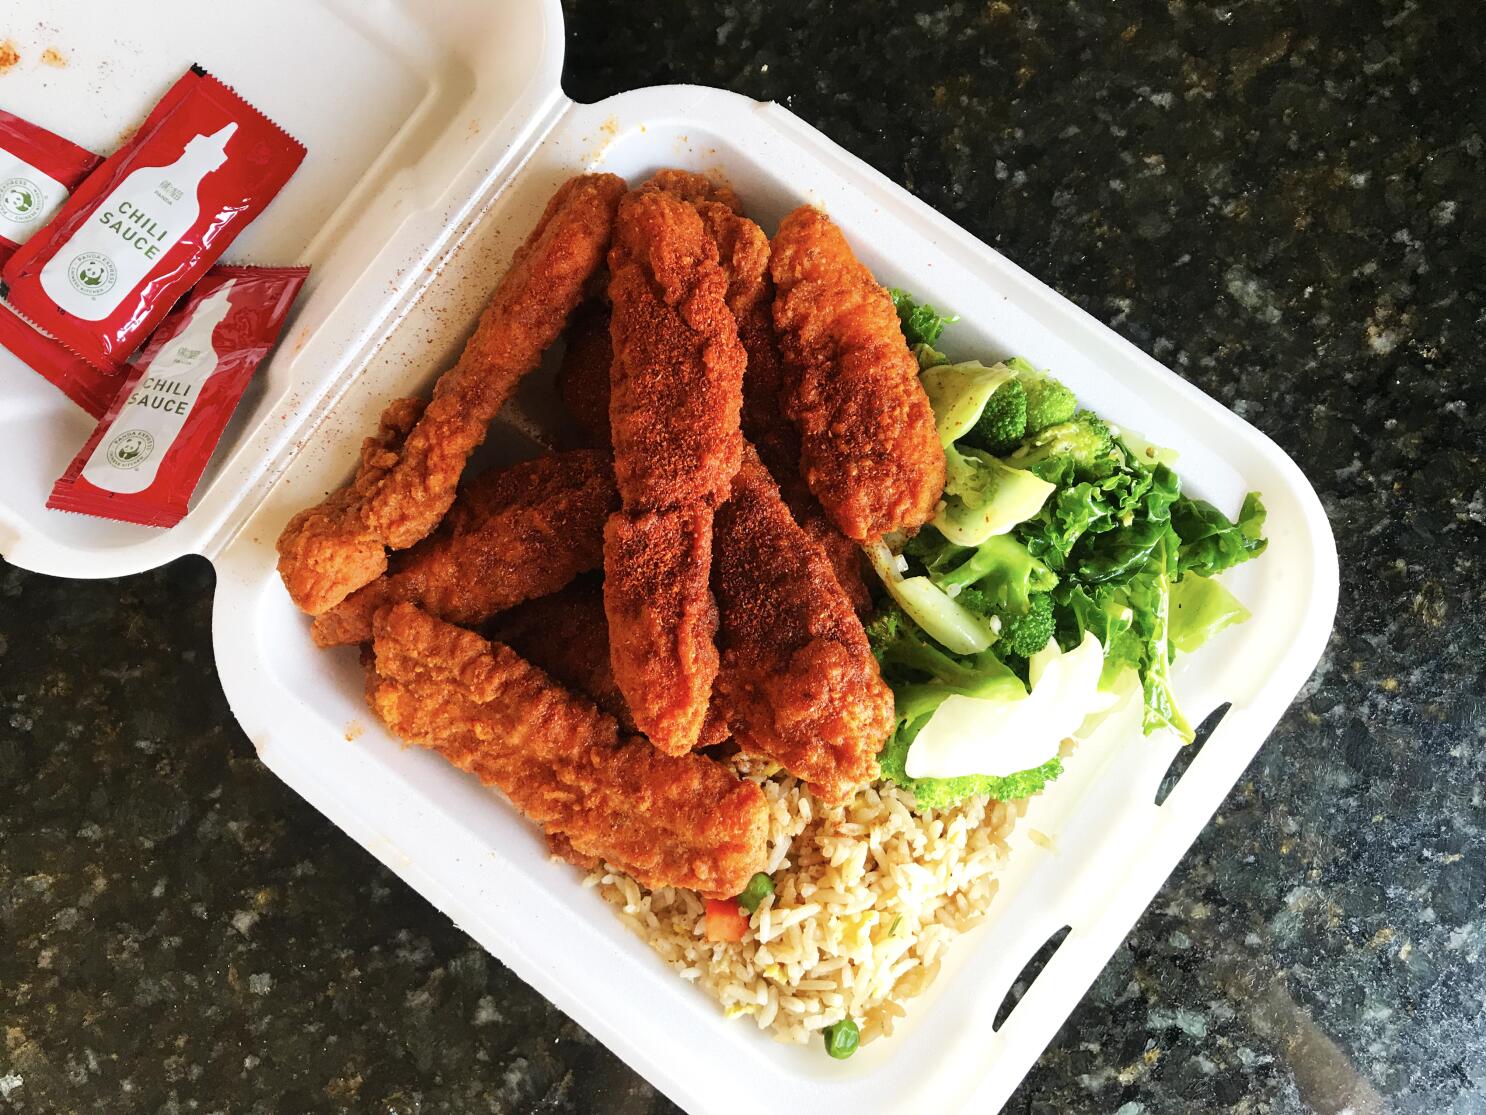 Panda Express and 'Hot Ones' Launch Spicy Chicken Dish